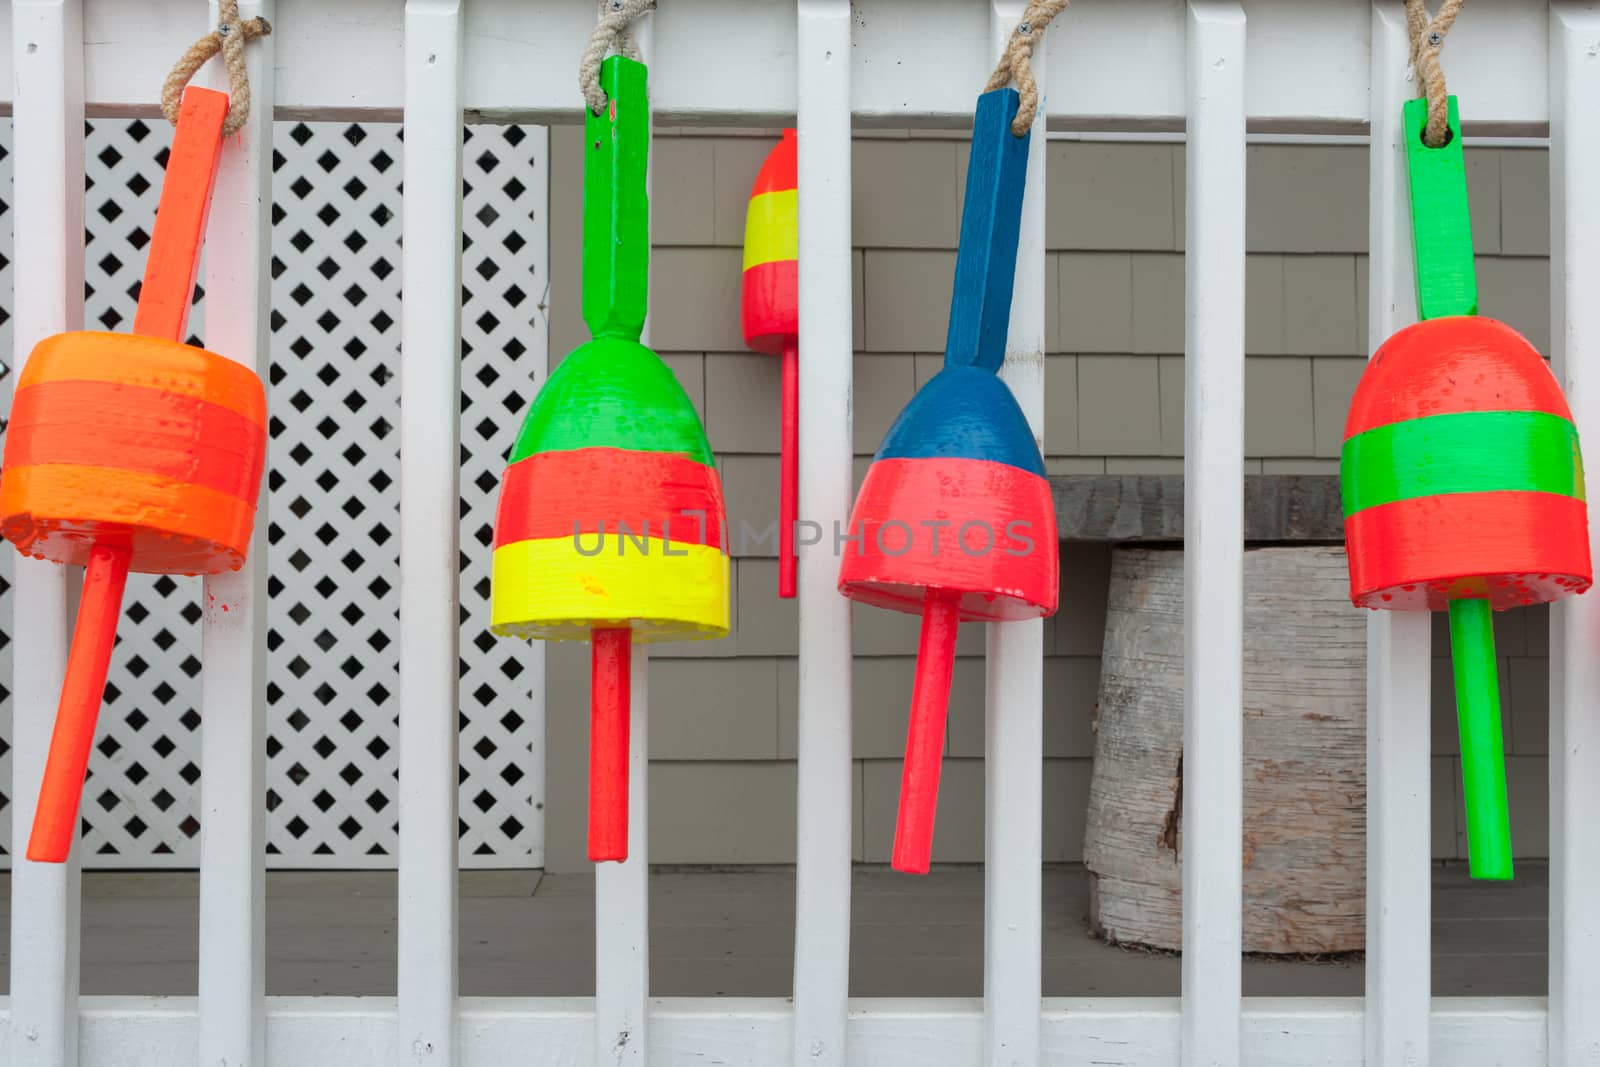 Brightly colored floats hanging on wall in fishing village. of Rye Harbor, Massachusetts.